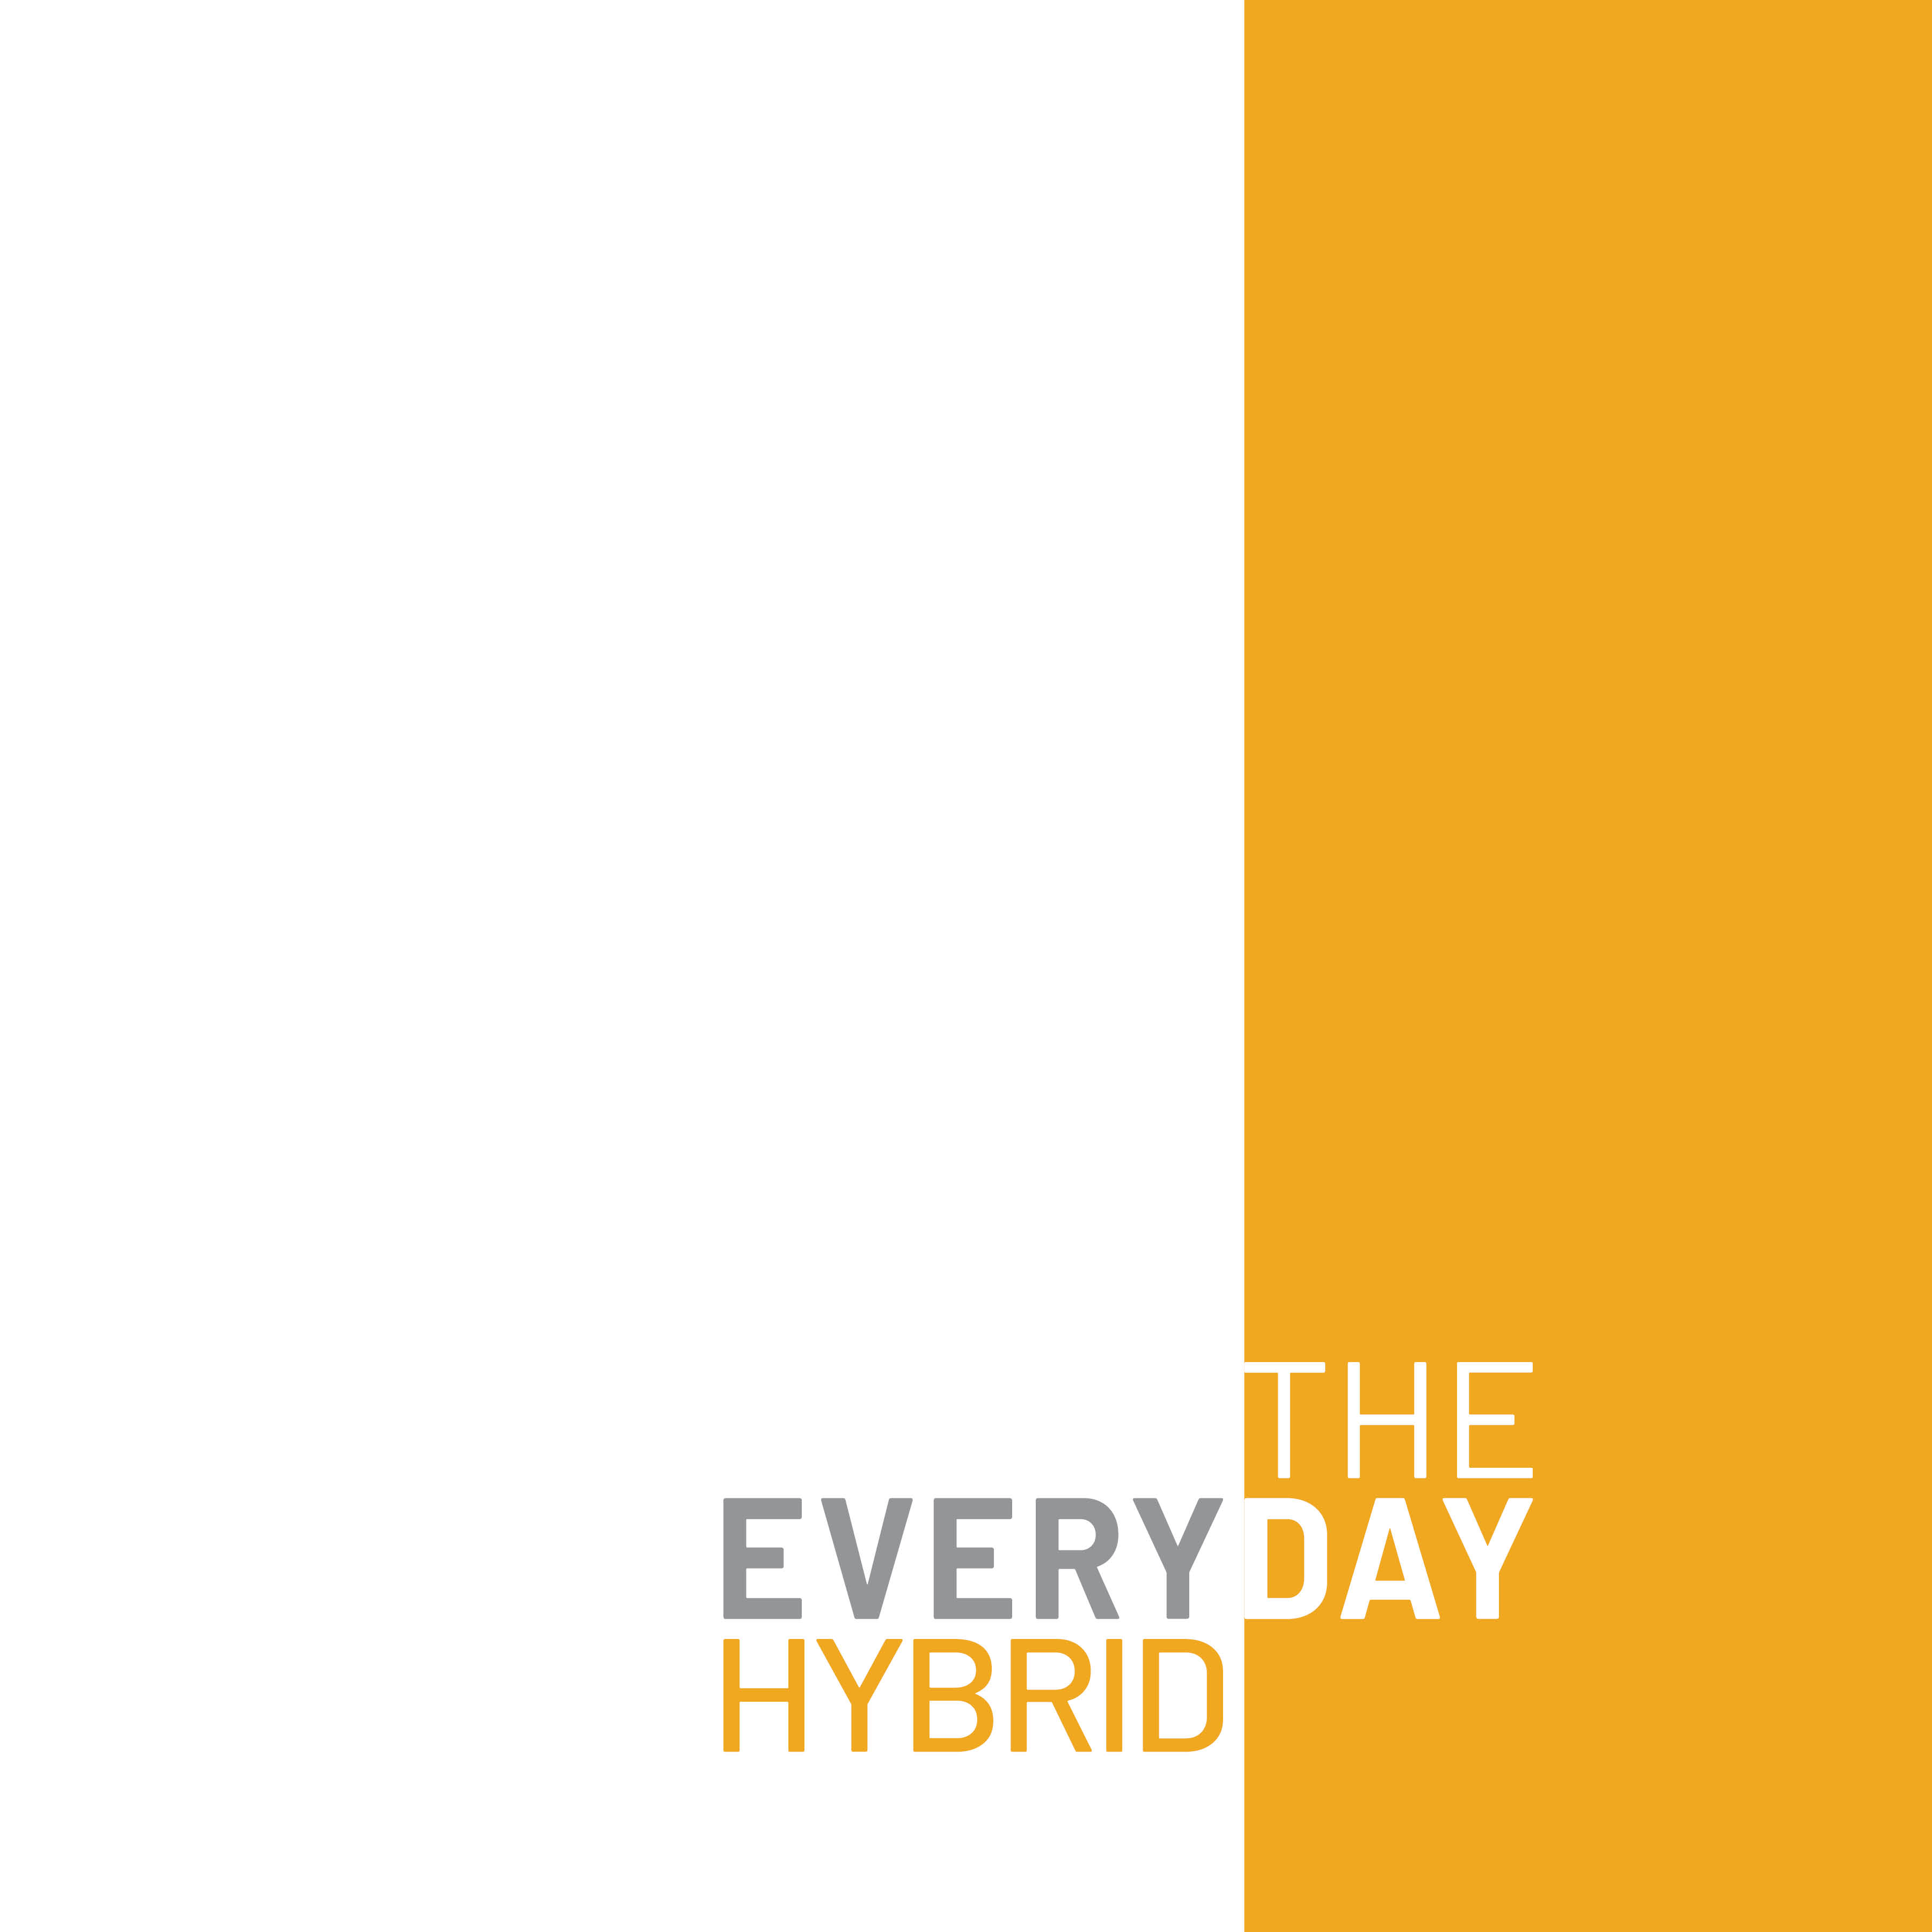 The Everyday Hybrid: "Uniting Commerce, Community, and Residence for a Thriving Urban Tomorrow"   (click for a larger preview)